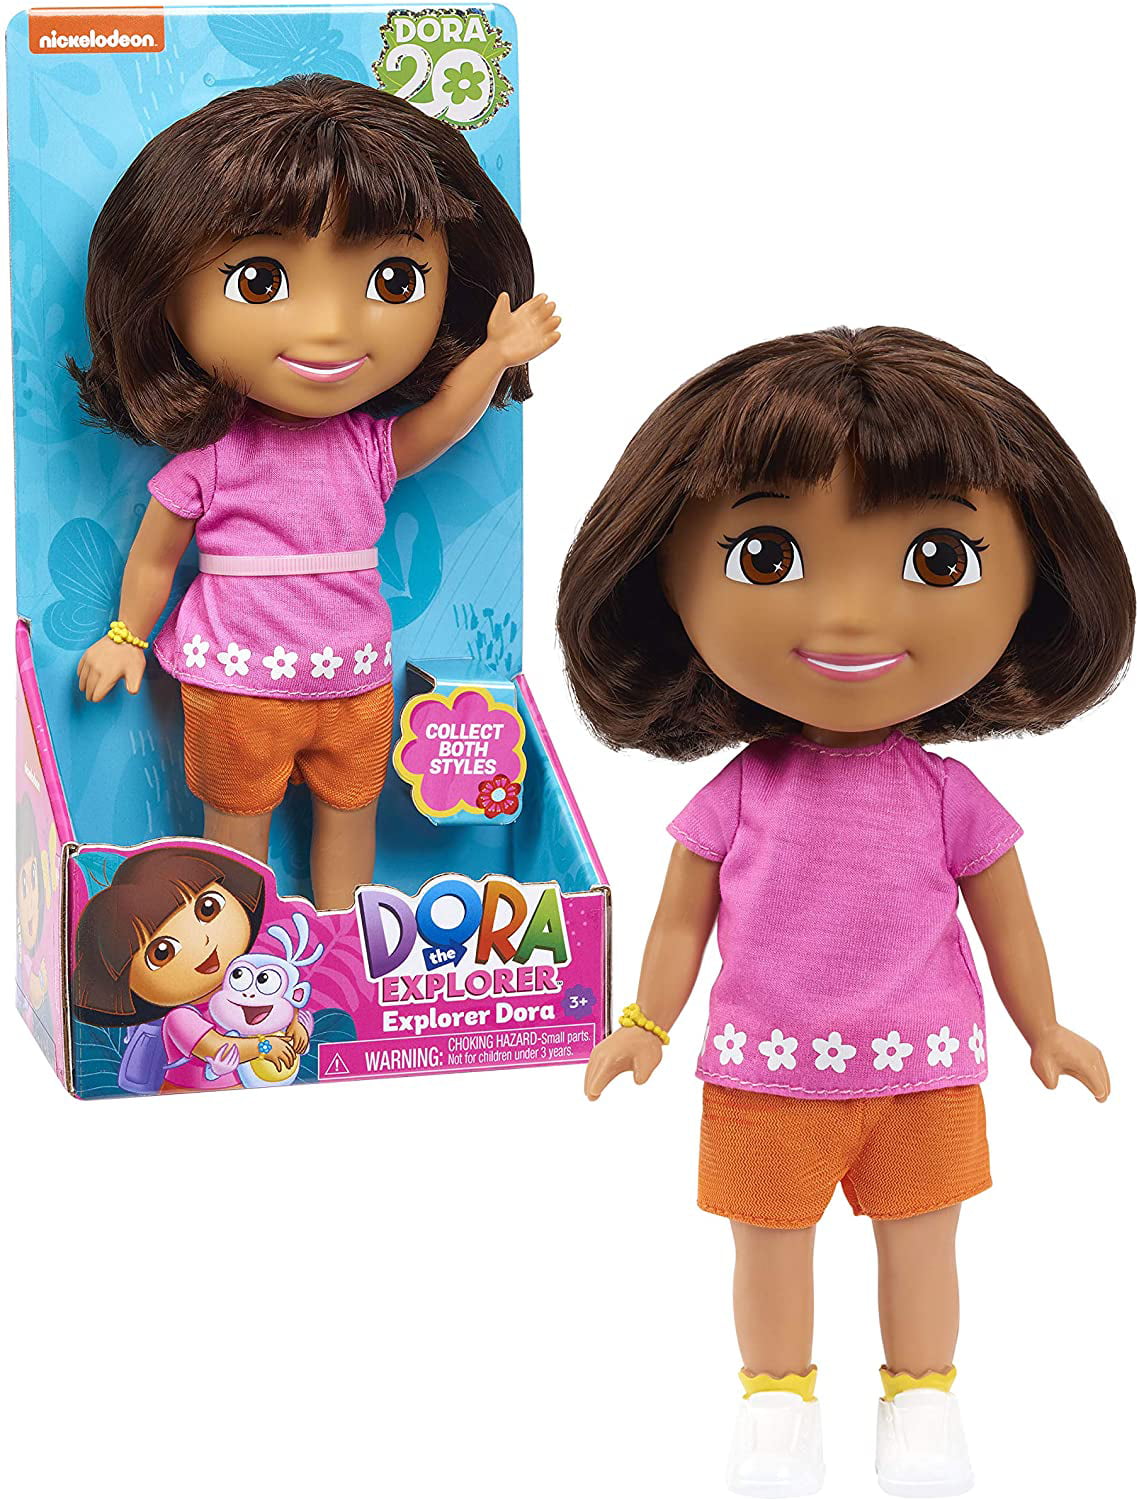 Dora the Explorer Adventure Doll, 8.75 inches, Ages 3+